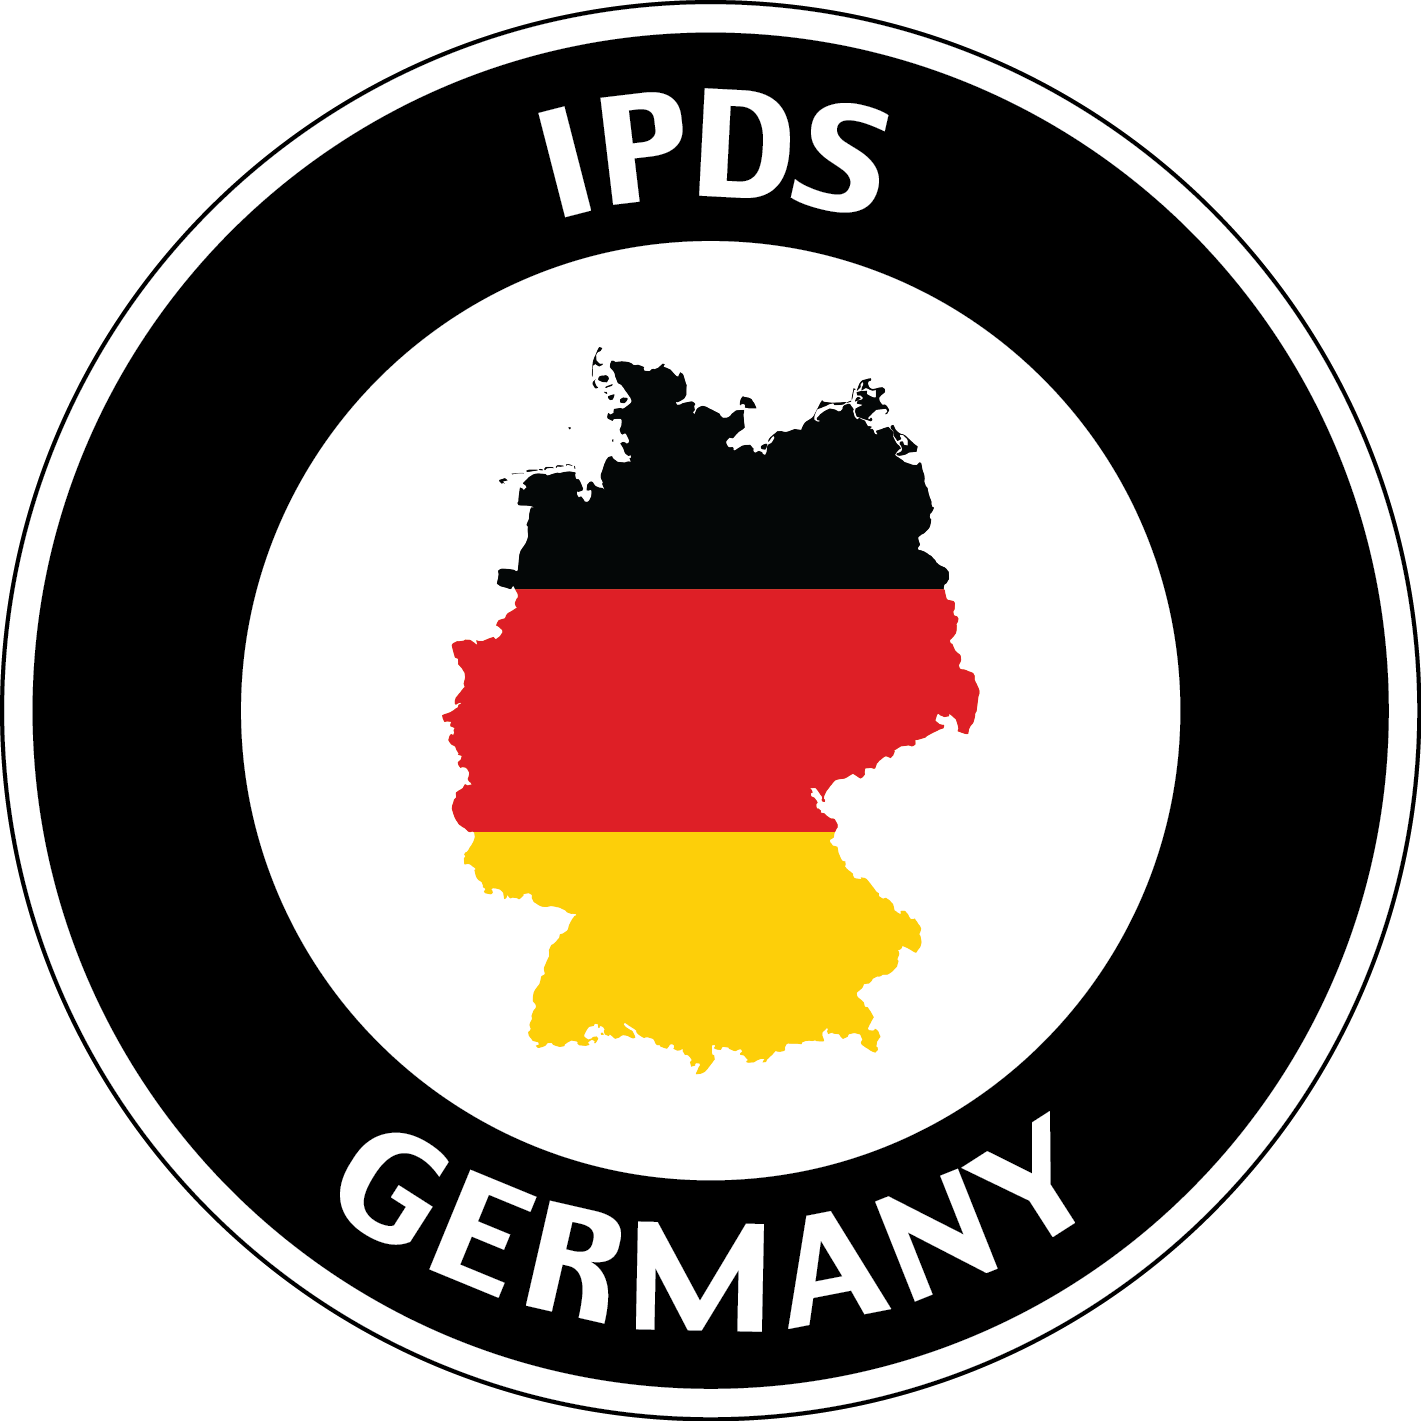 IPDS Germany icon with country and flag